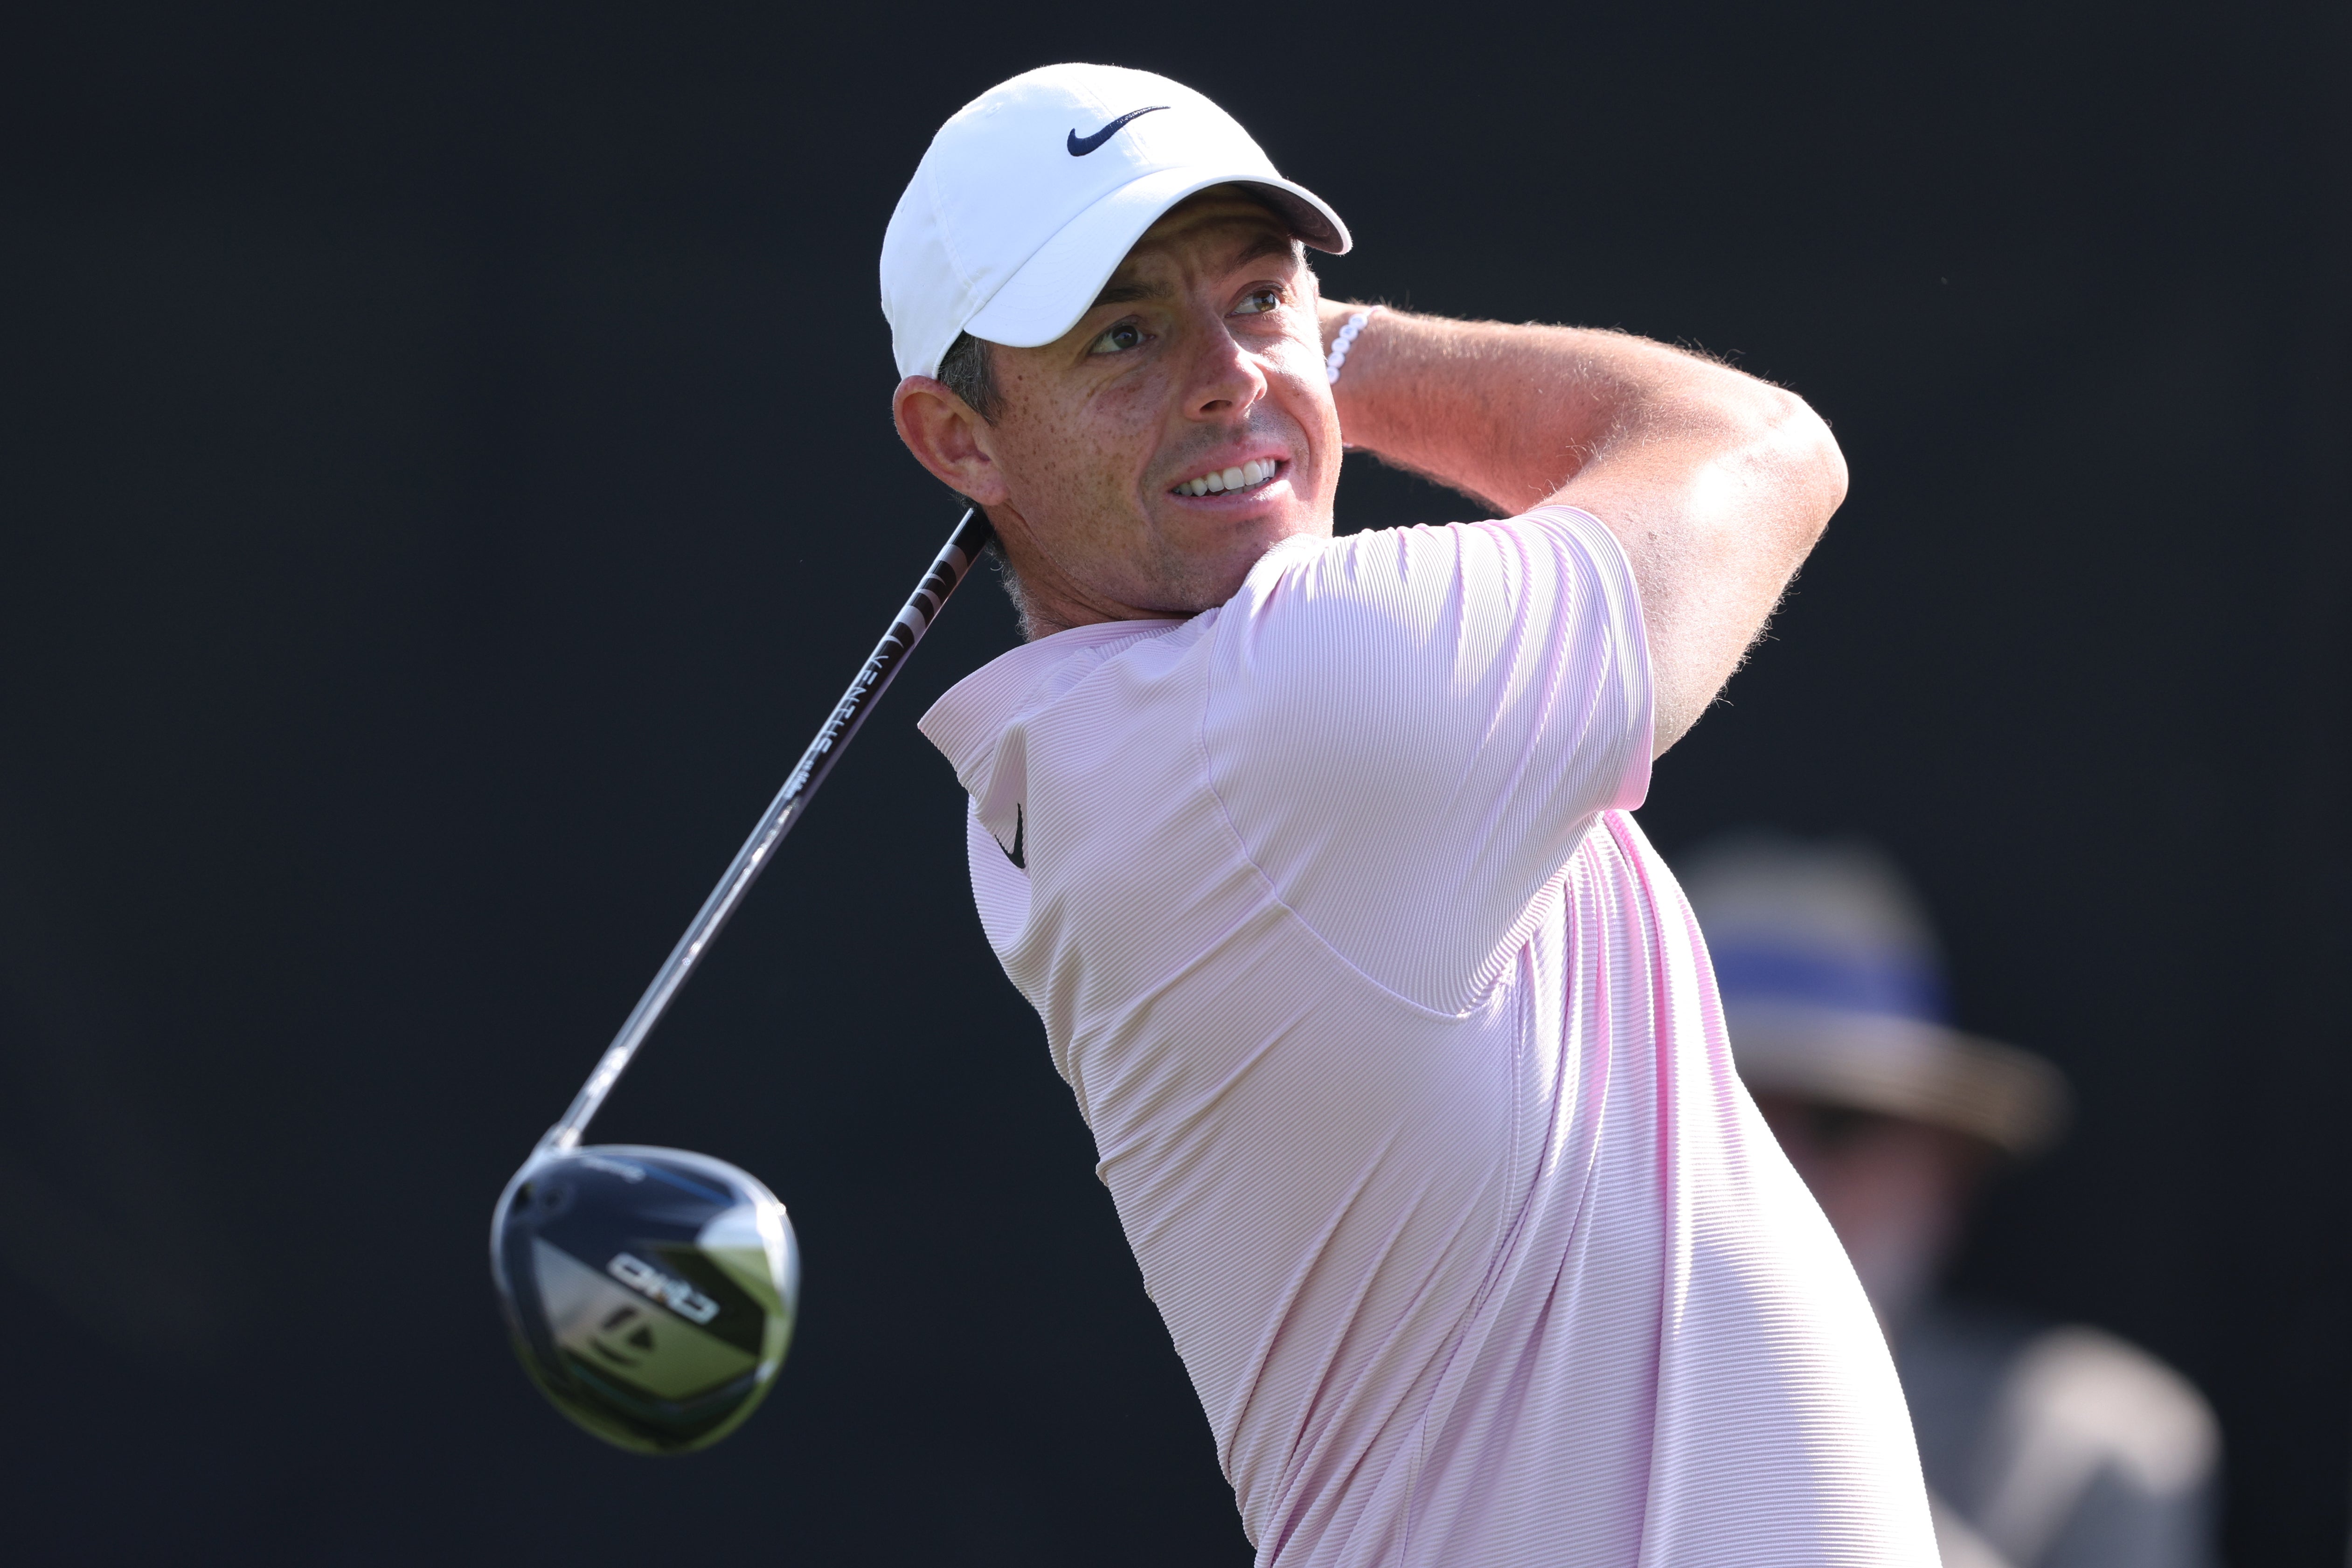 Defending champion Rory McIlroy carded seven birdies